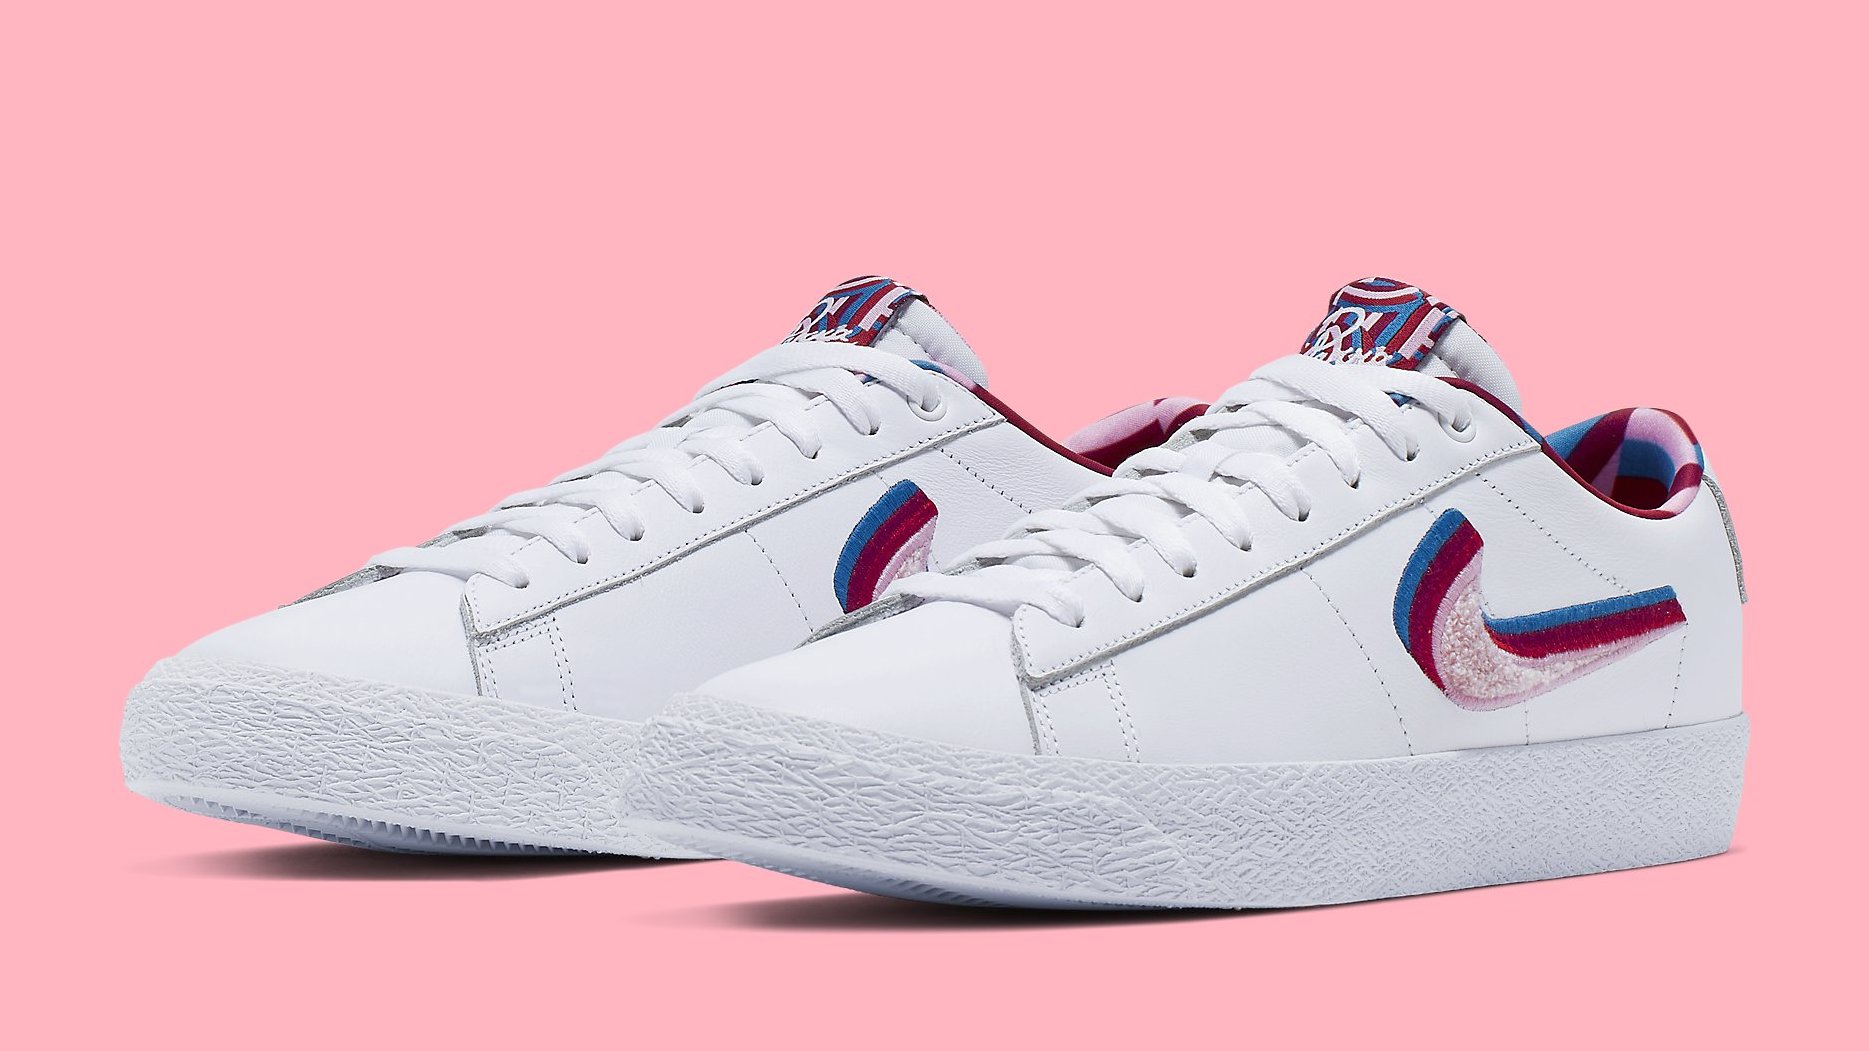 A Better Look at the Parra x Nike SB Blazer Low | Complex